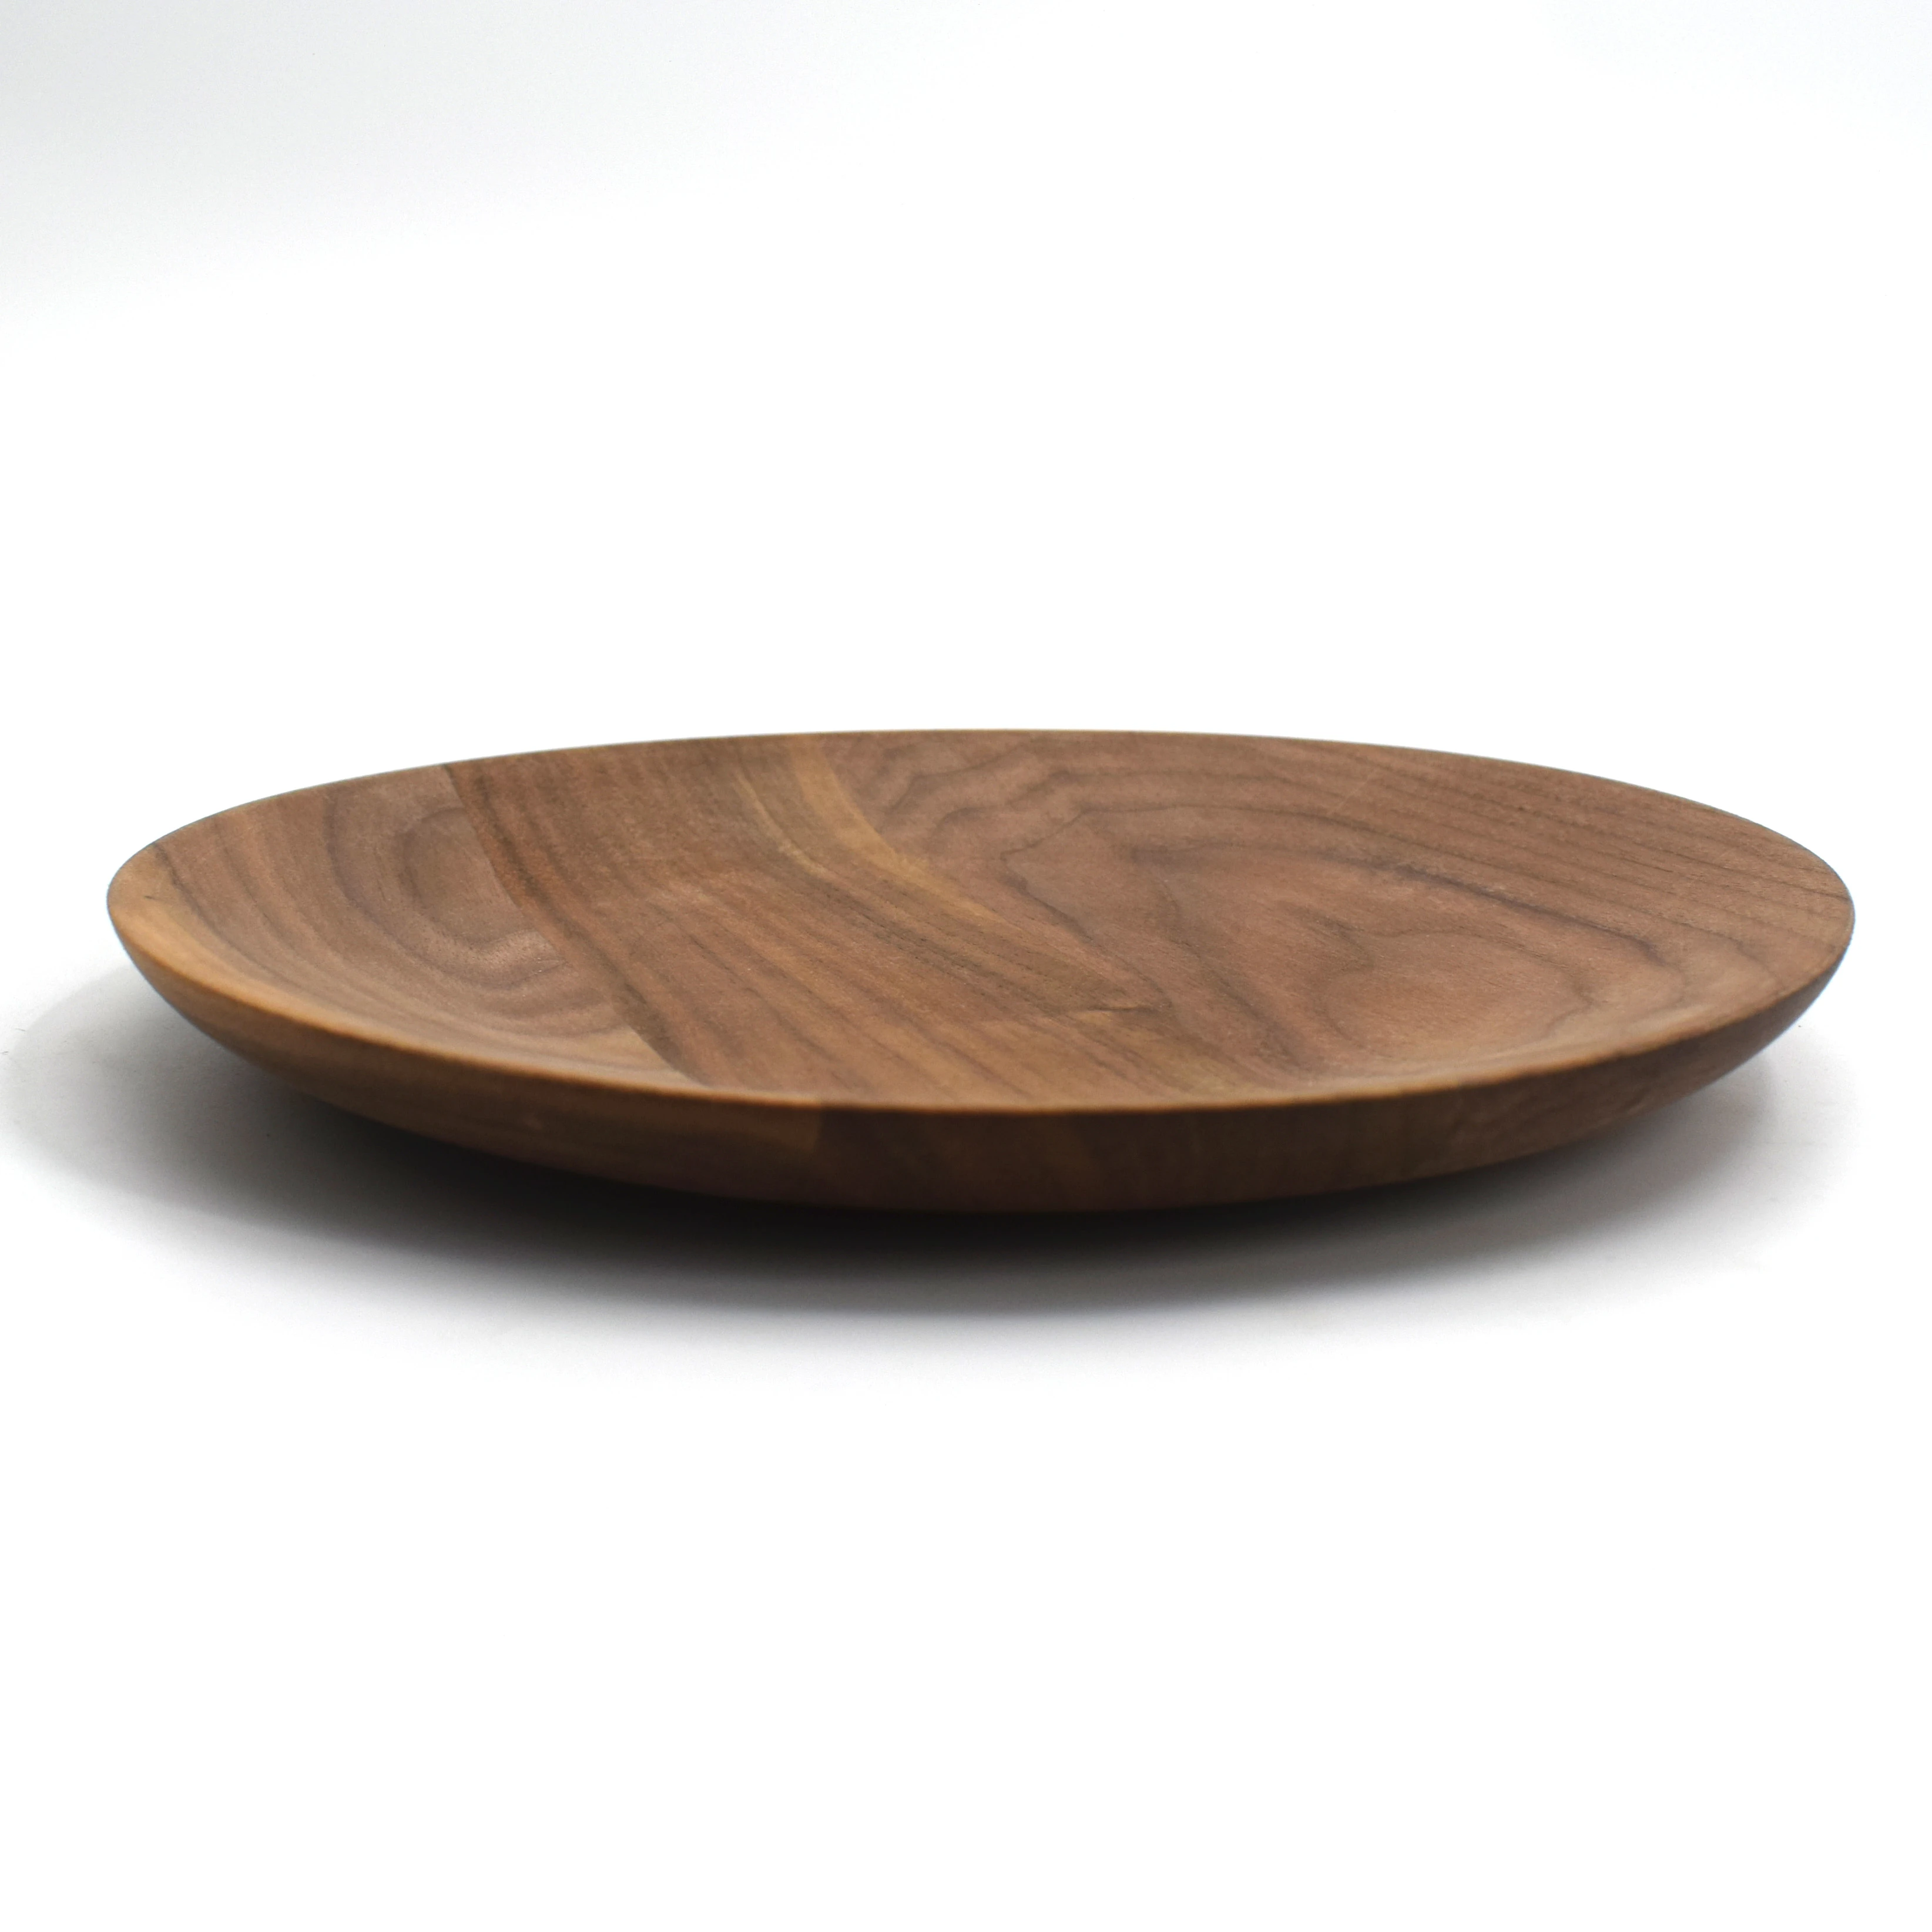 Eco-Friendly Creativity Reusable Food Fruit Dish Round Snack Breakfast Serving Wooden Plates